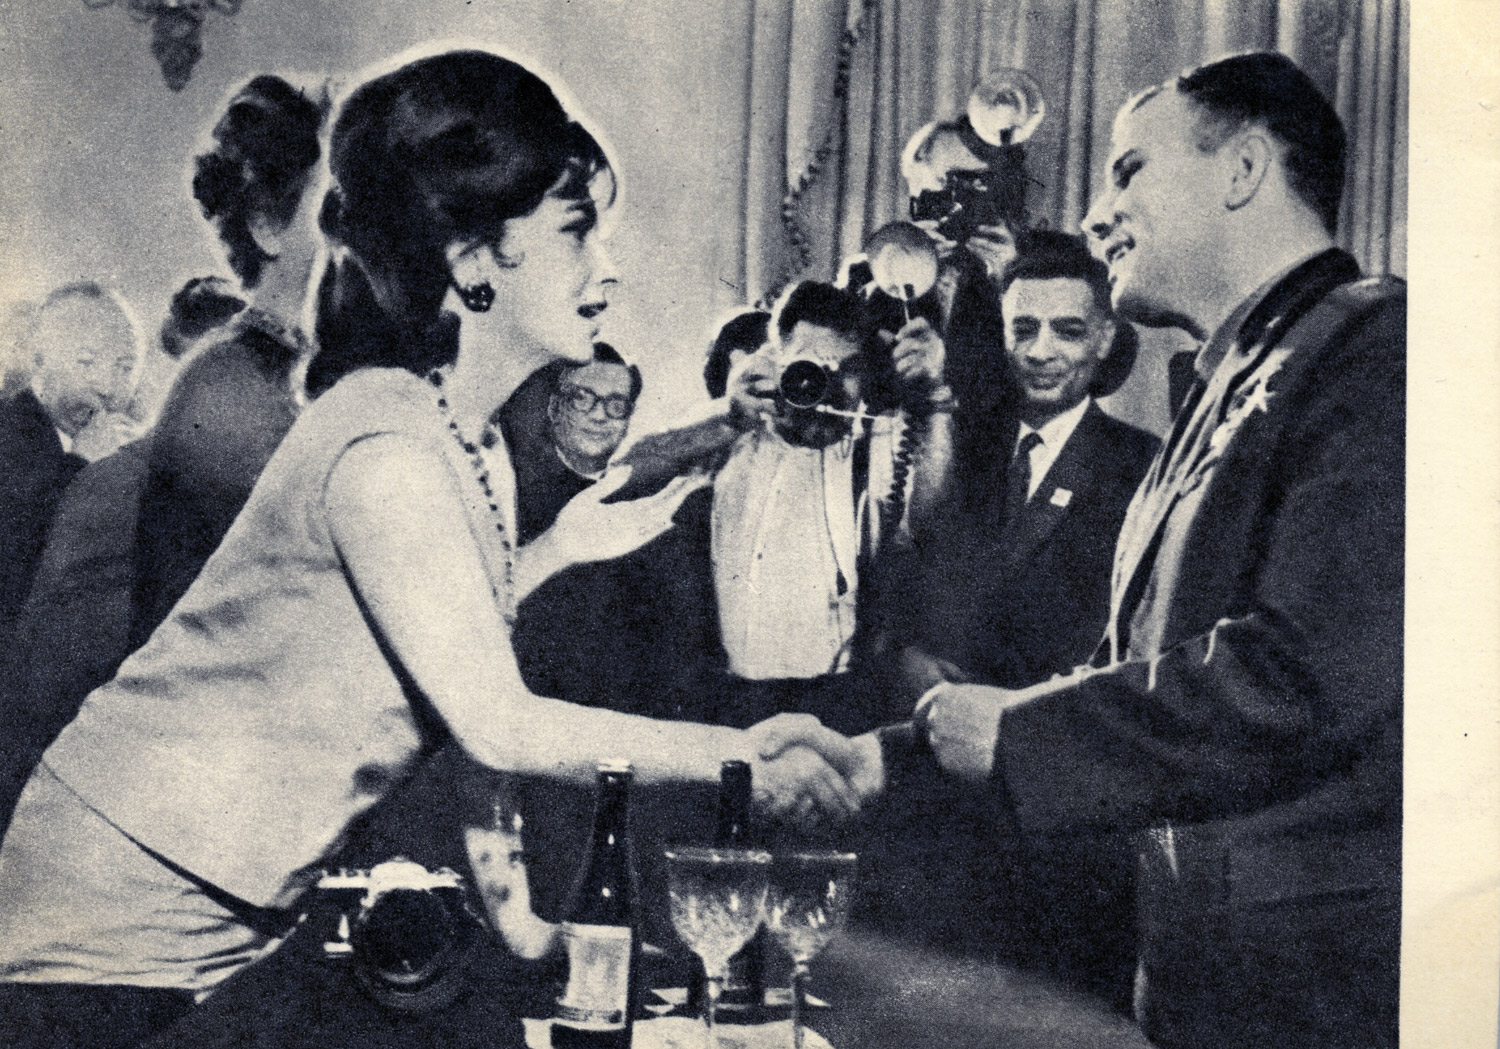 Gagarin is congratulated by Italian movie star Gina Lollobrigida. The caption wonders:  A man who has been in space! What is he like? Hundreds of thousands of people rush to shake his hand, offer him good wishes.